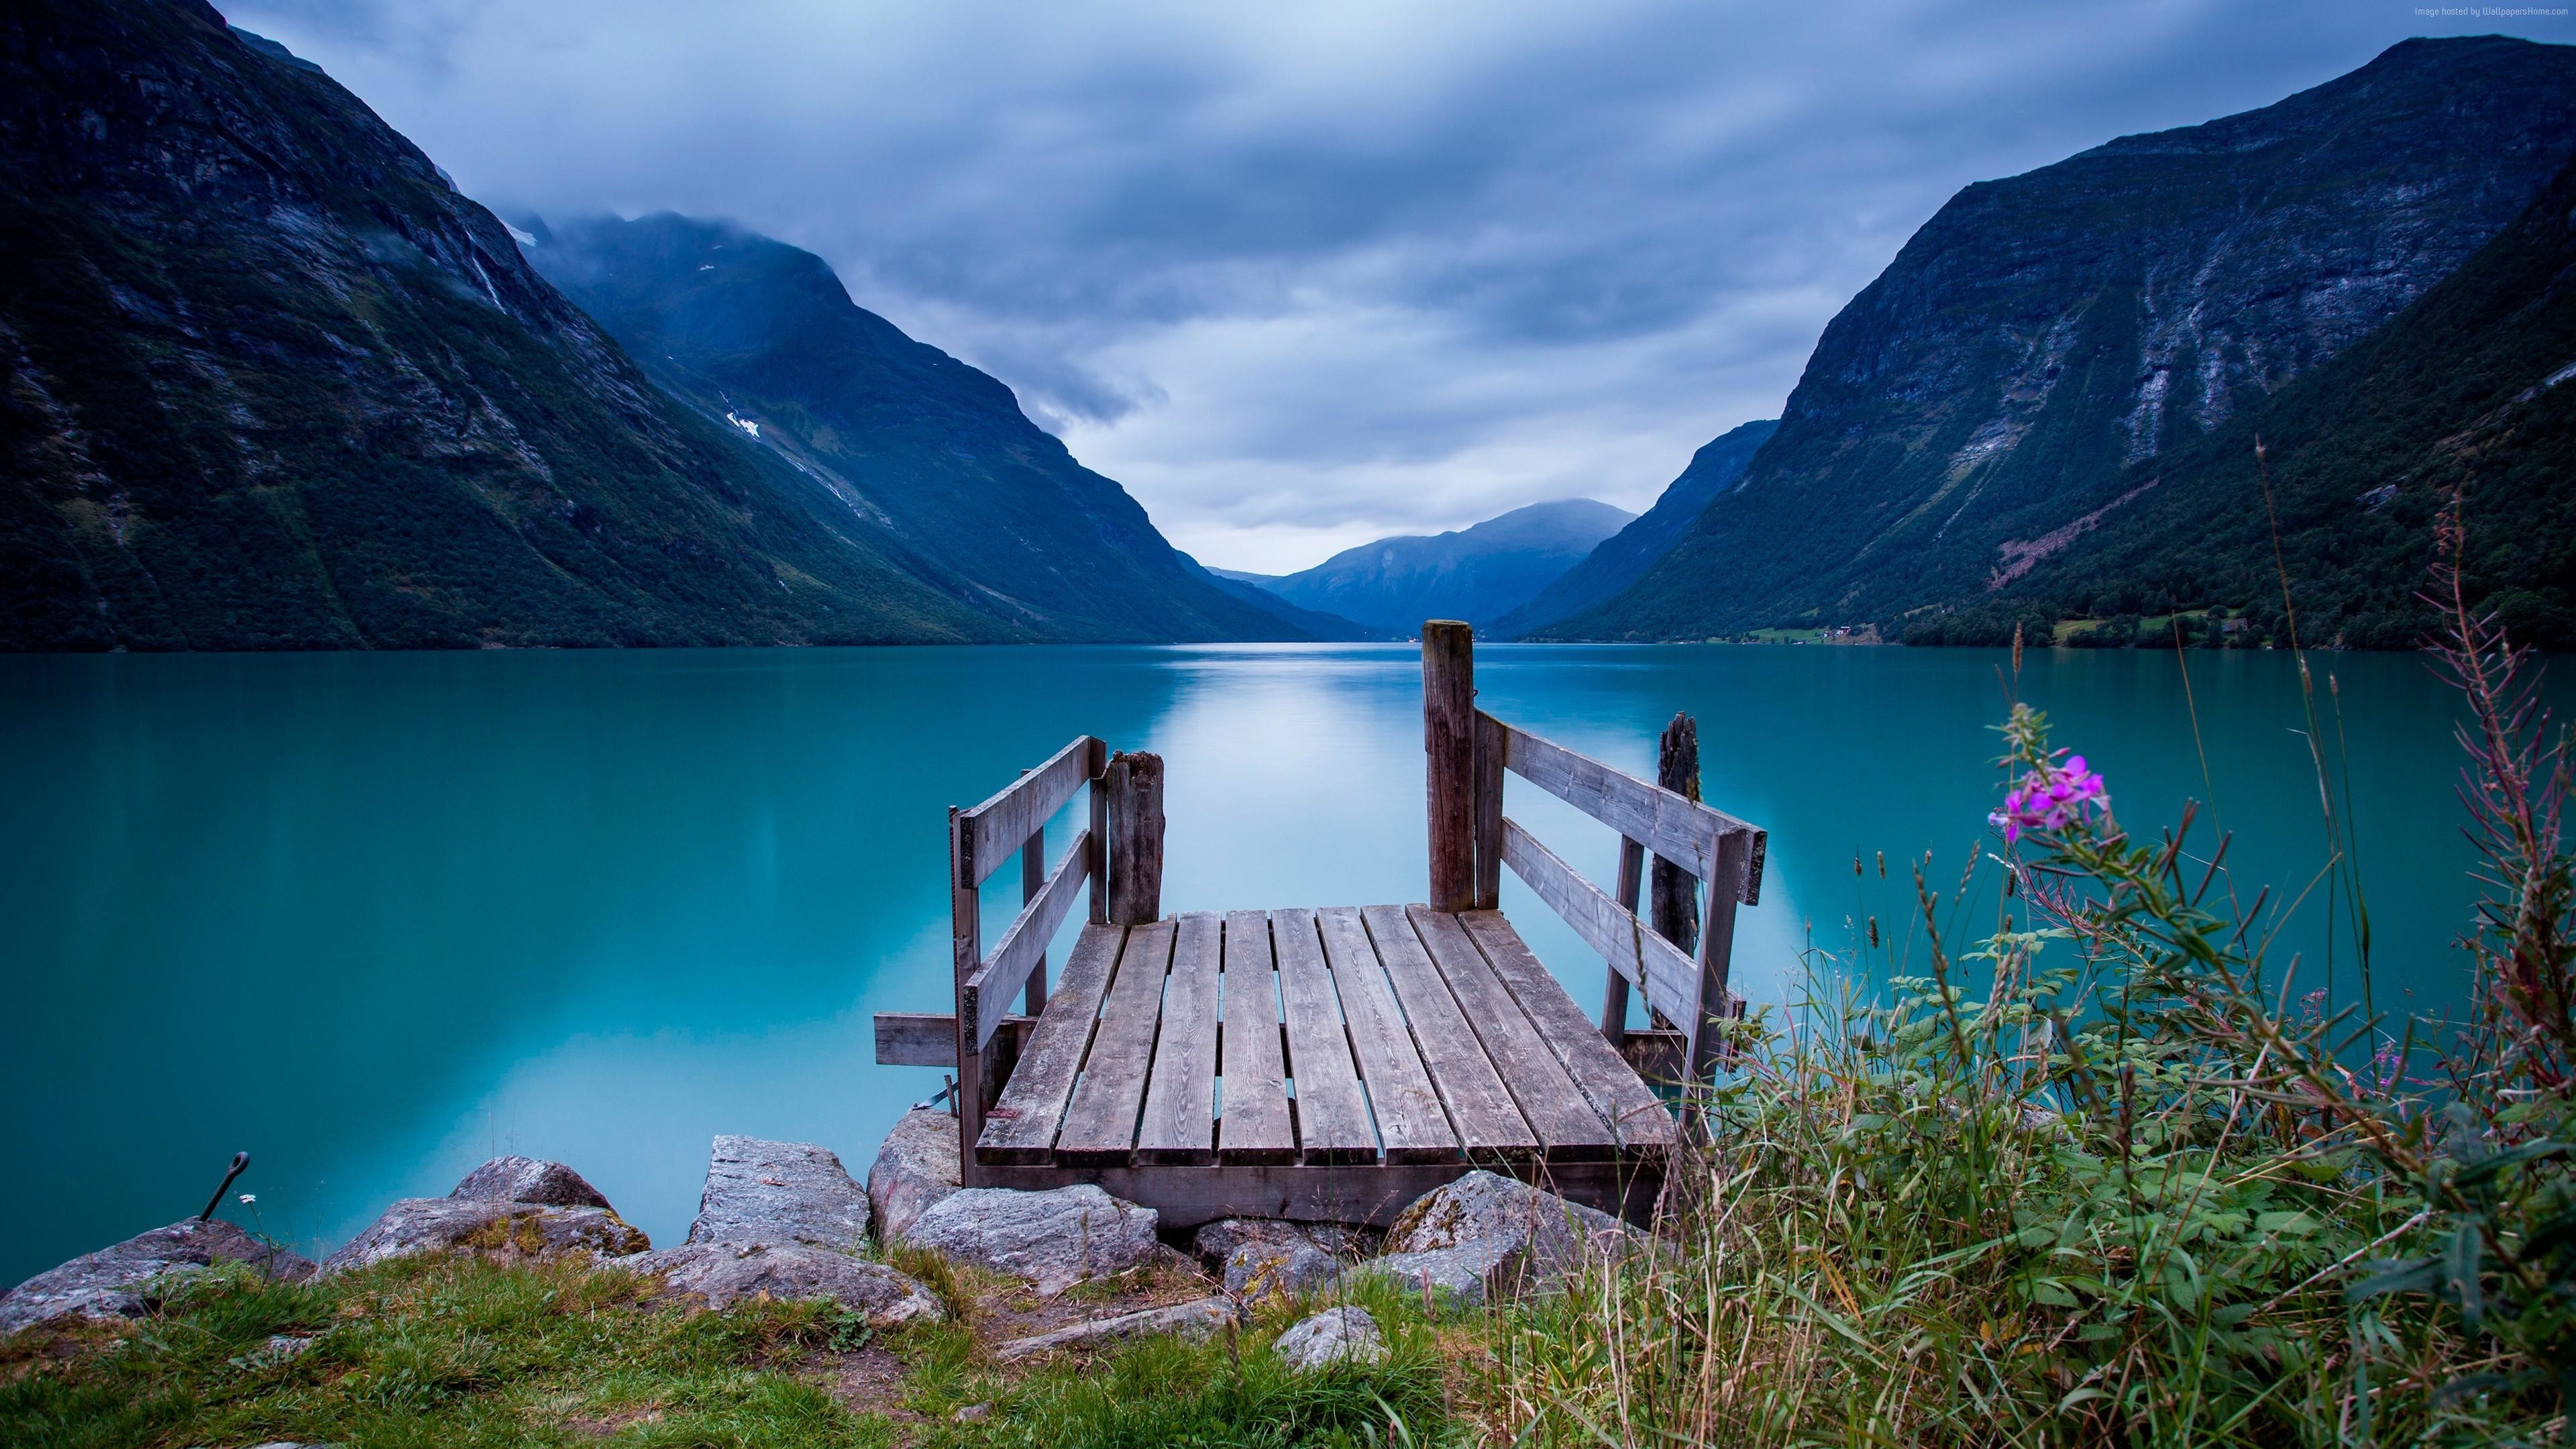 3840x2160, Most Beautiful Scenery From Norway Wallpaper - Norway Wallpaper 4k - HD Wallpaper 